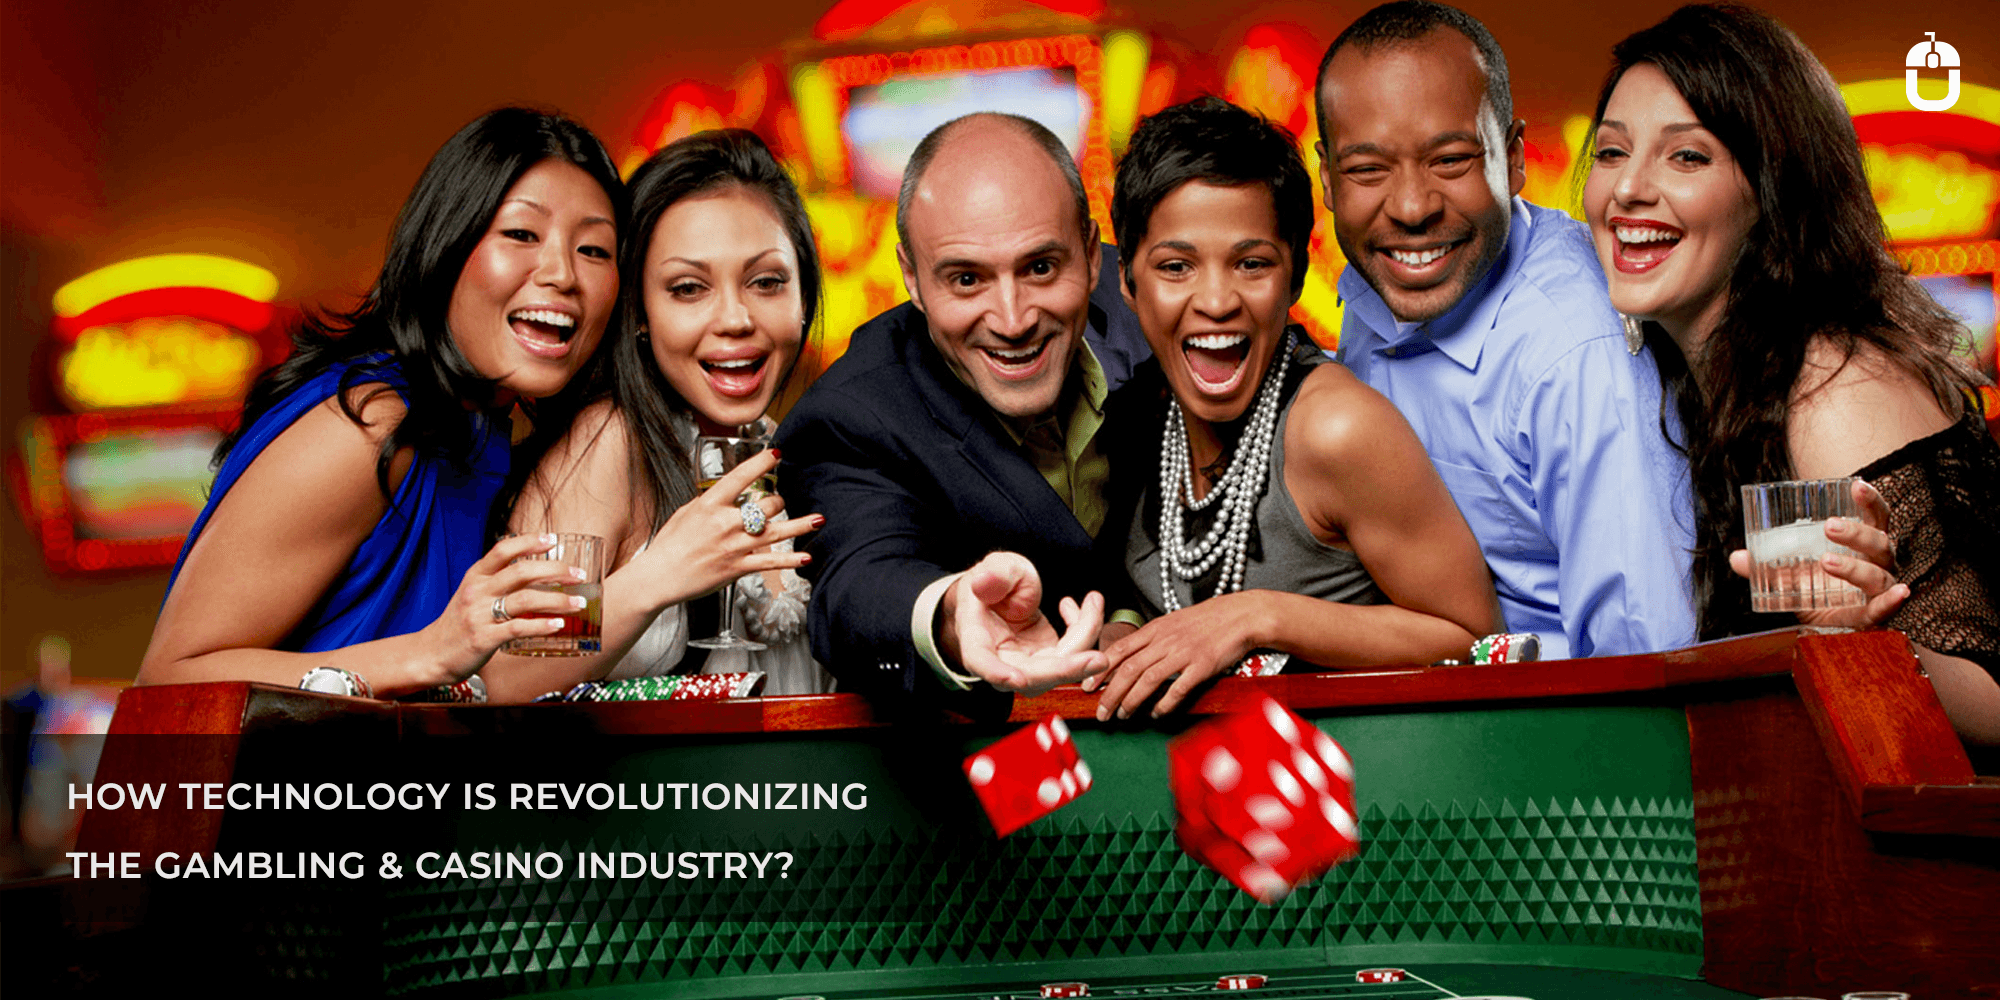 HOW TECHNOLOGY IS REVOLUTIONIZING THE GAMBLING & CASINO INDUSTRY?